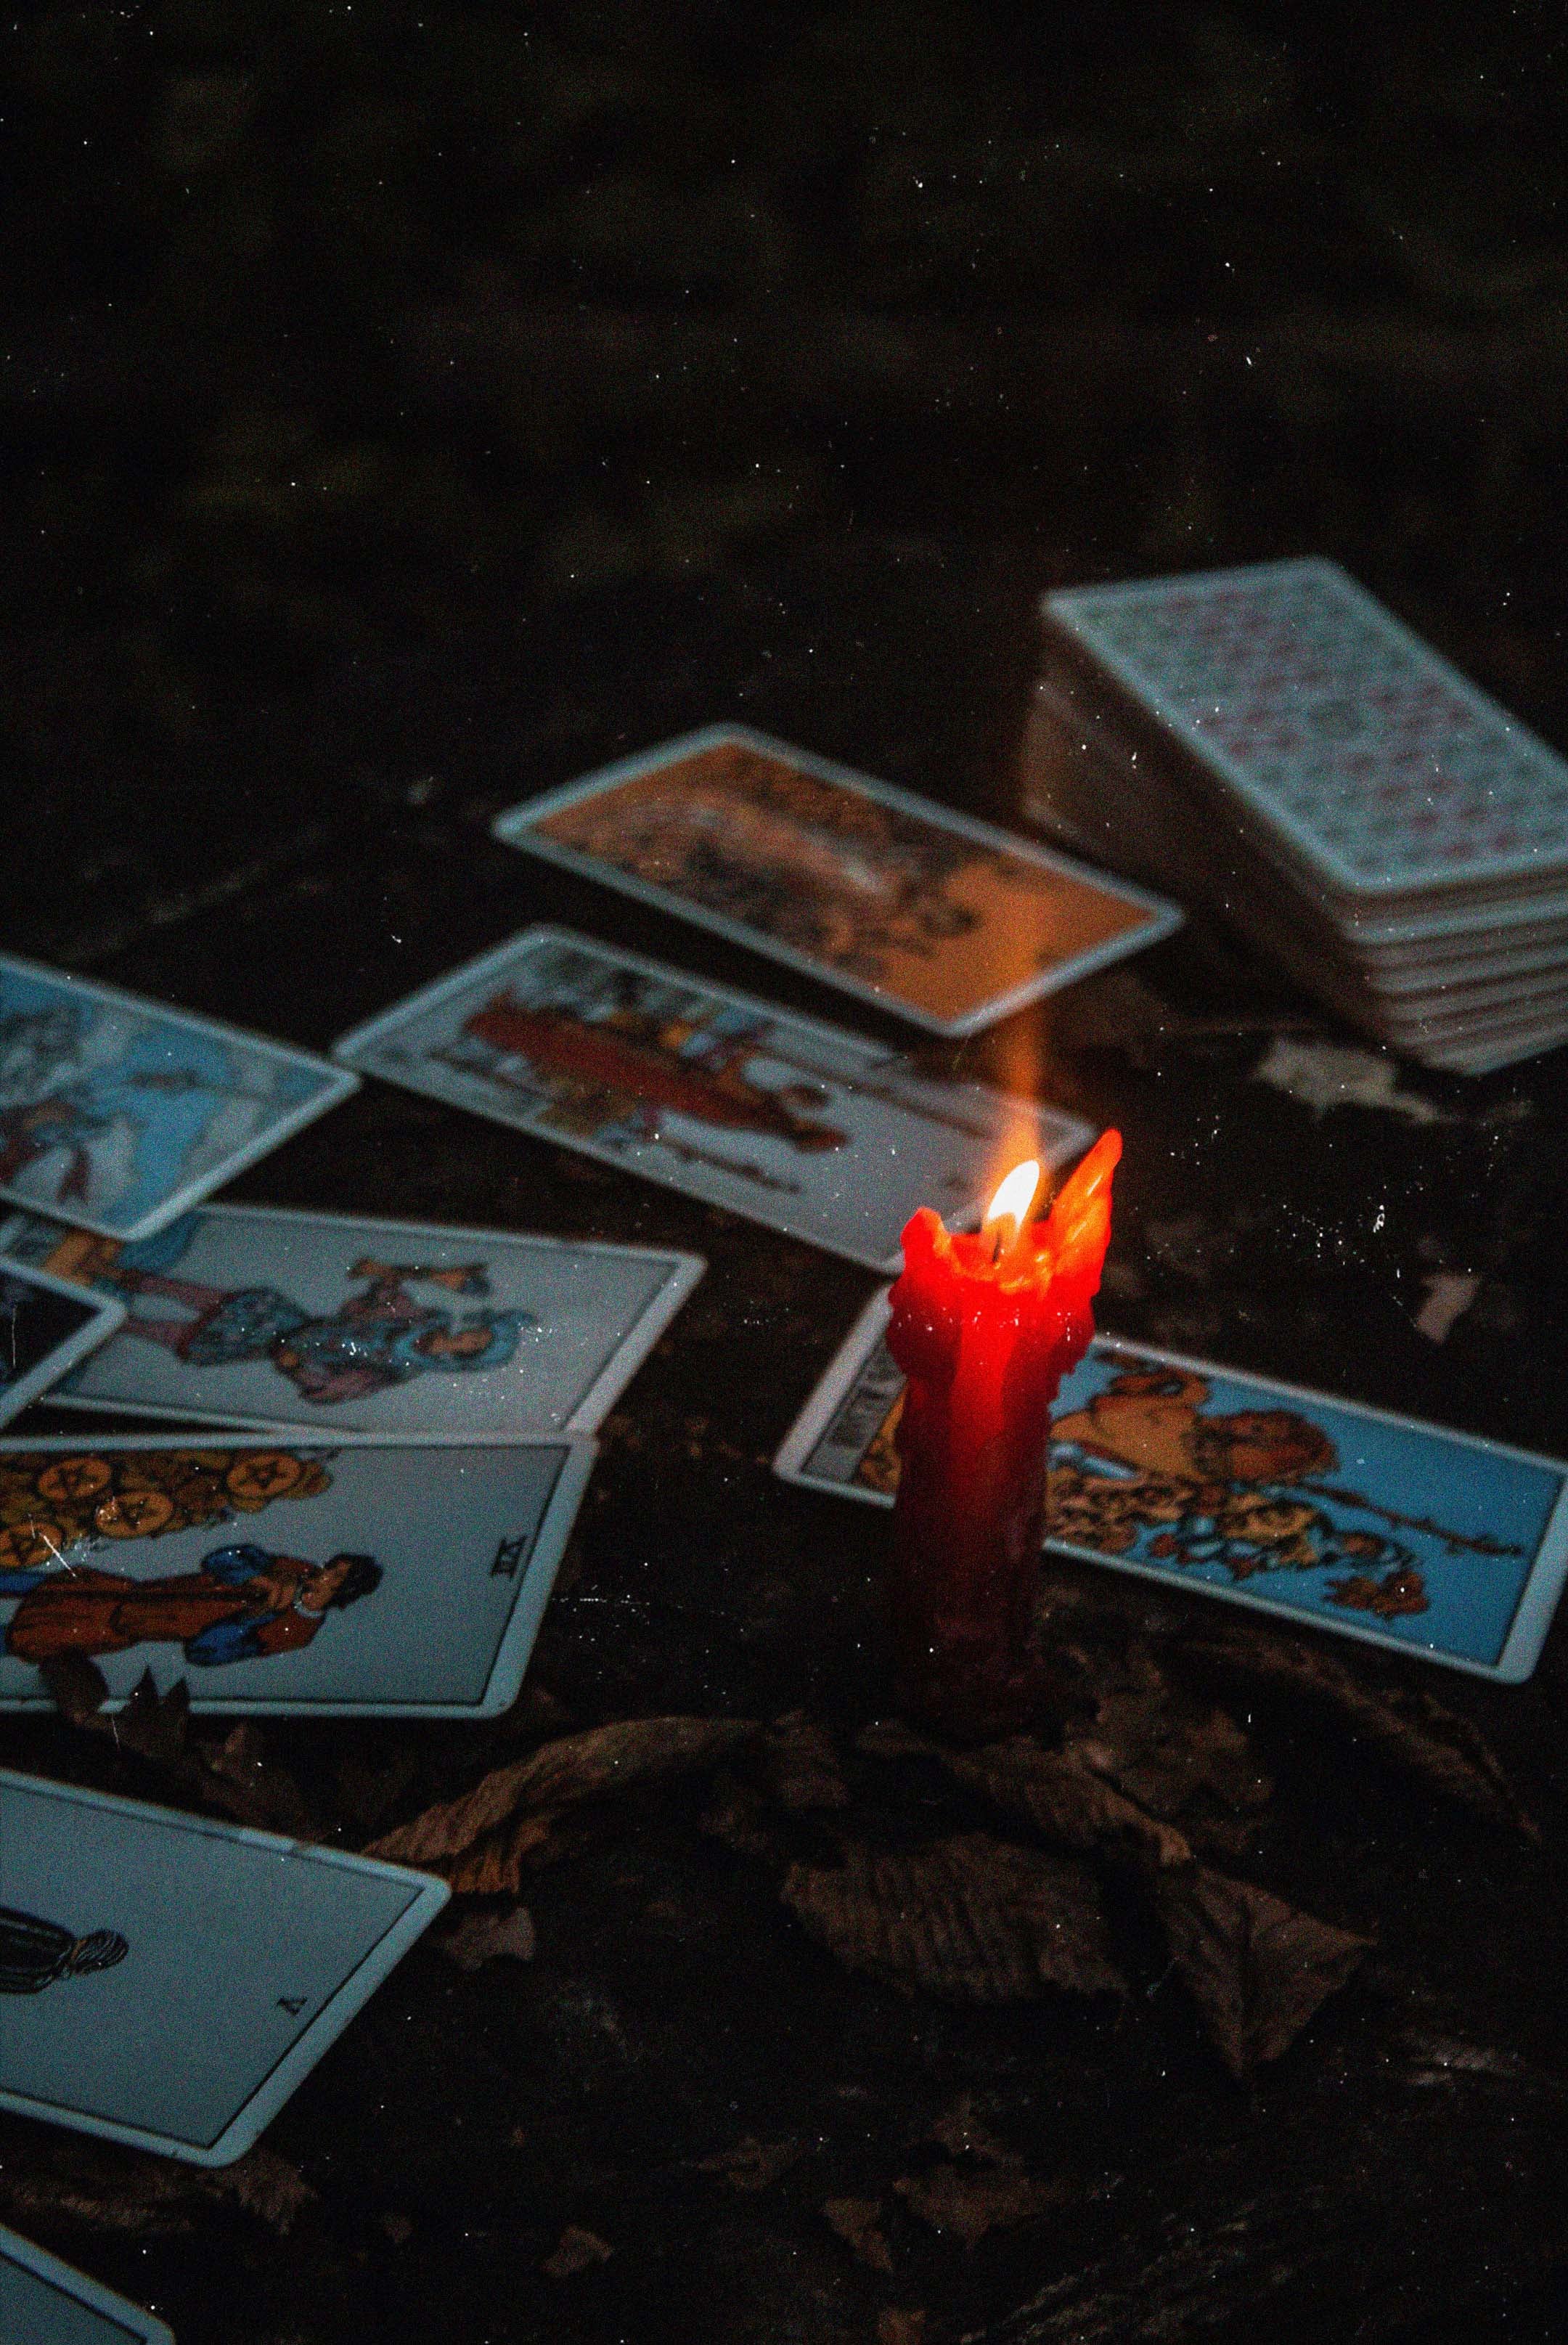 Tarot cards laying on a table, with a lit melting red wax candle.